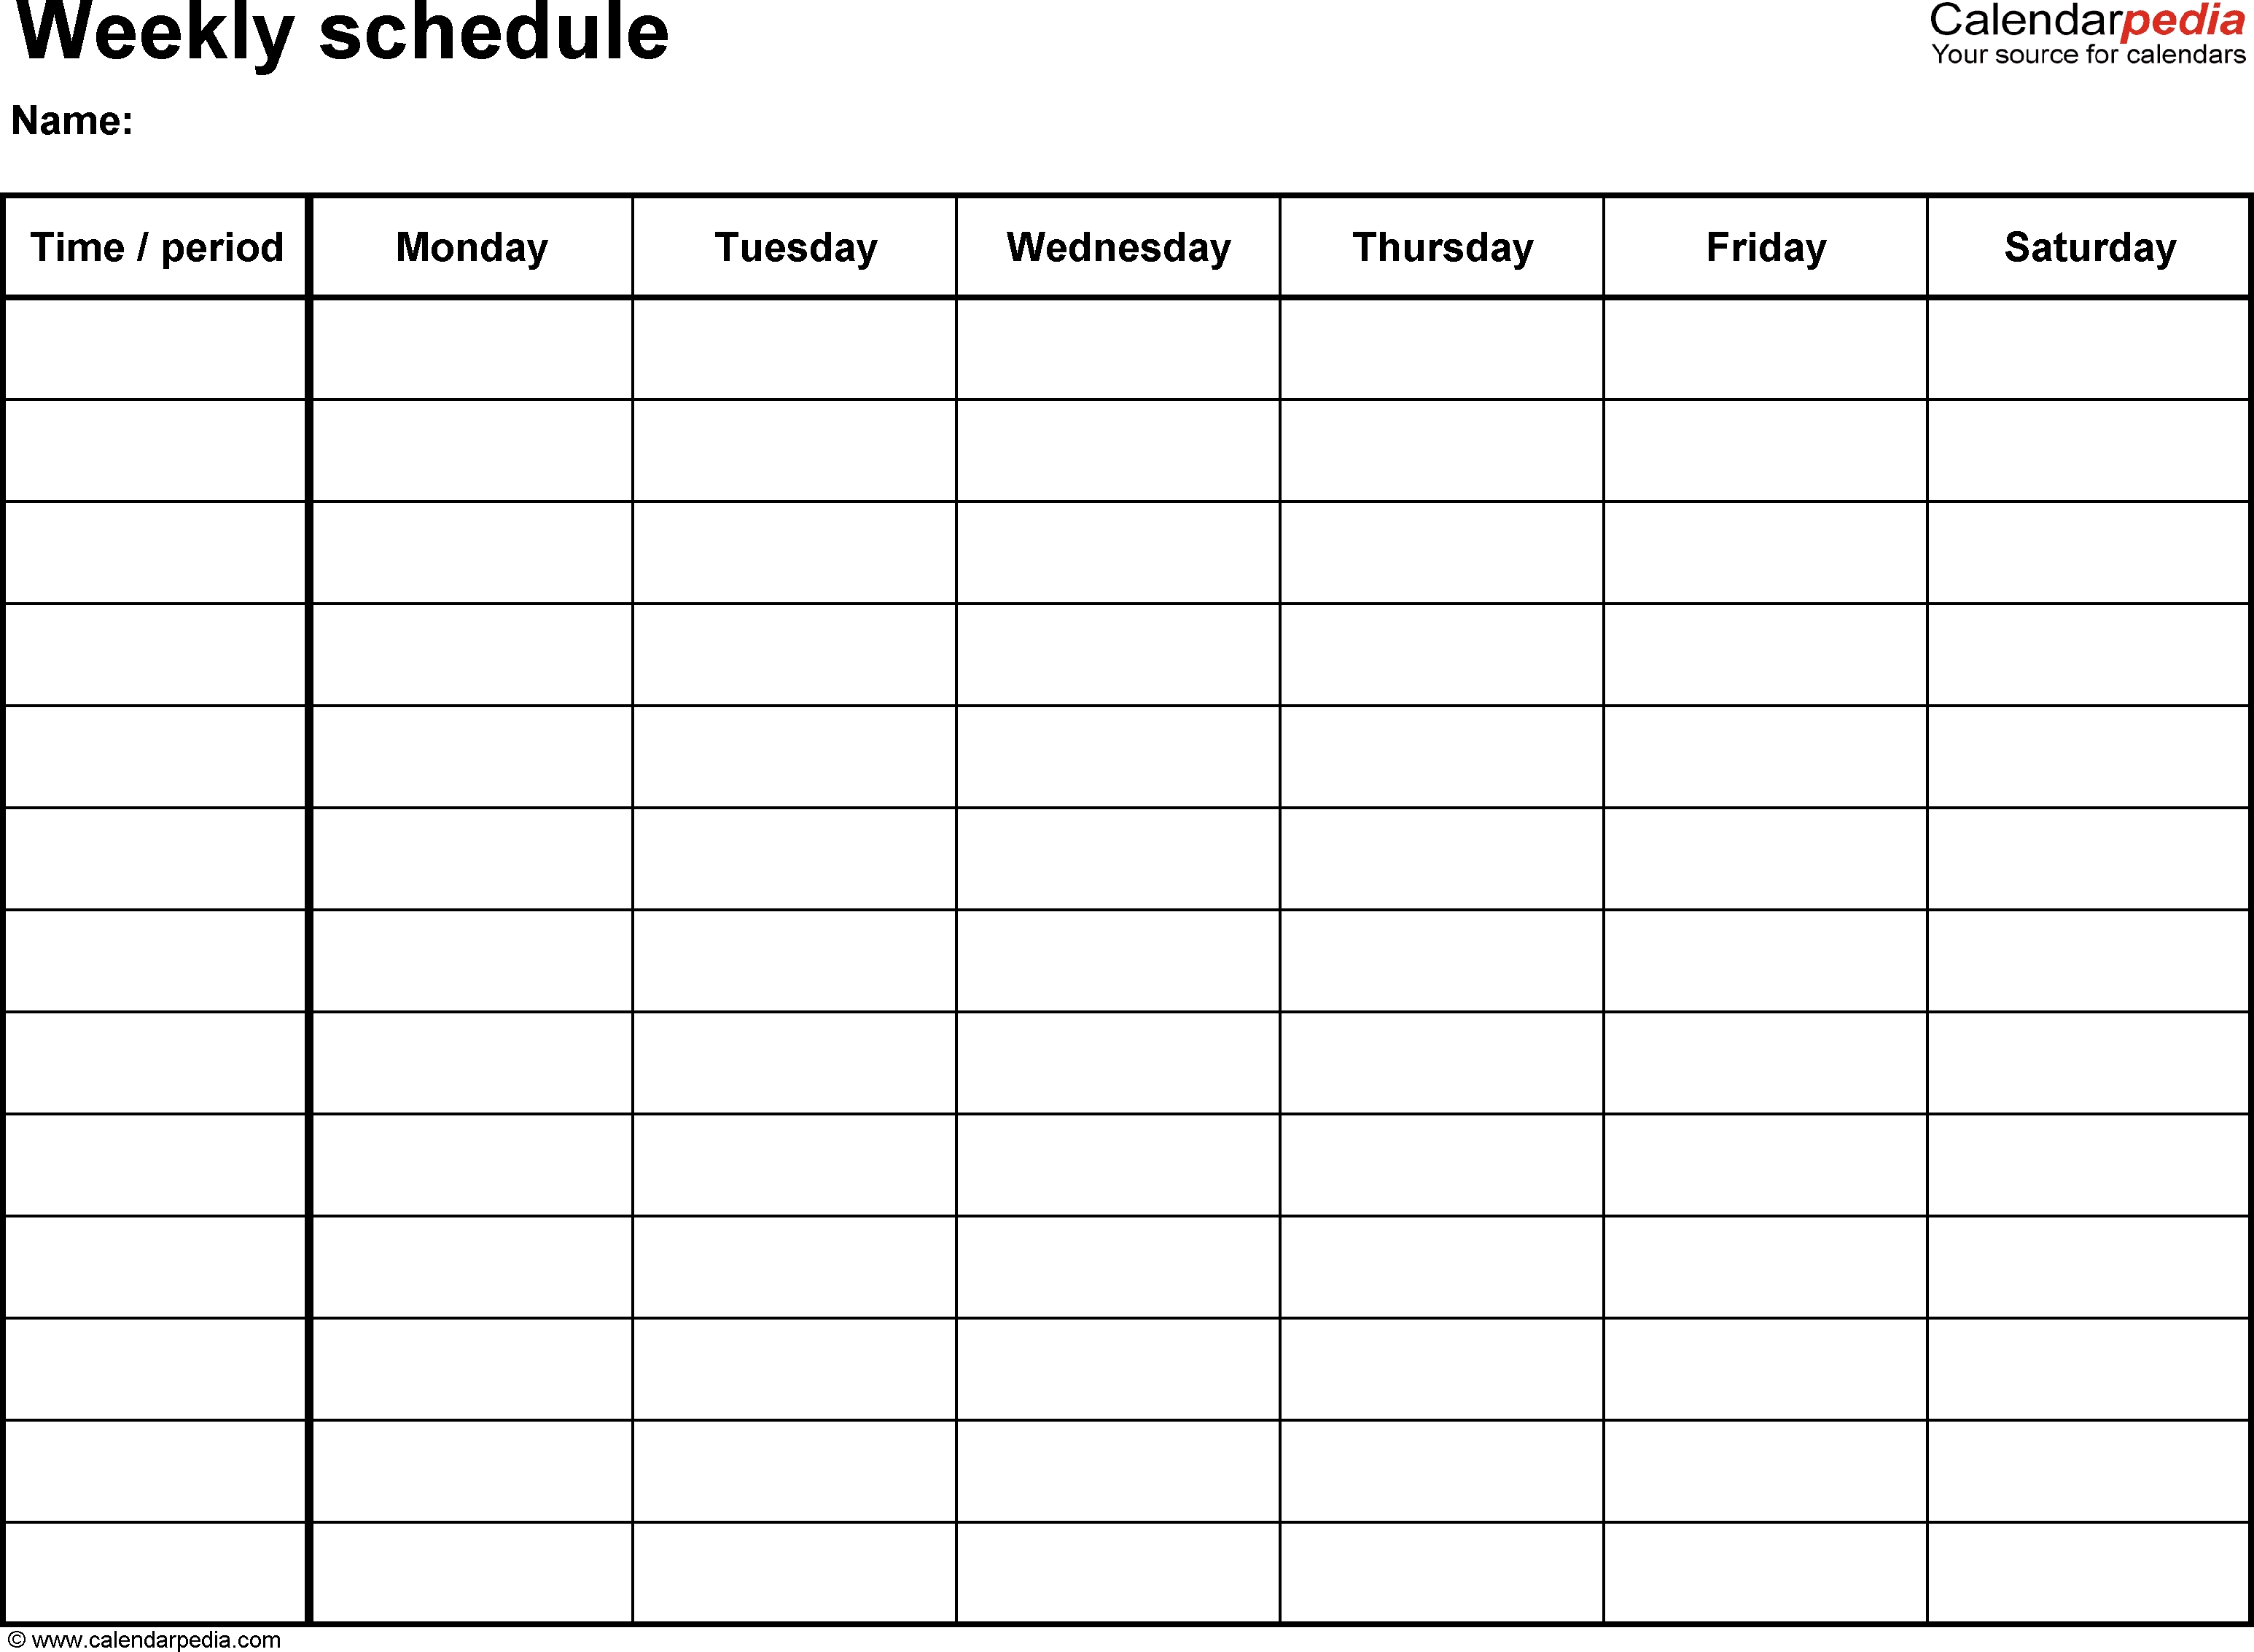 Free Weekly Schedule Templates For Word - 18 Templates regarding Printable 7-Day Calendar Template Monday Starts With That